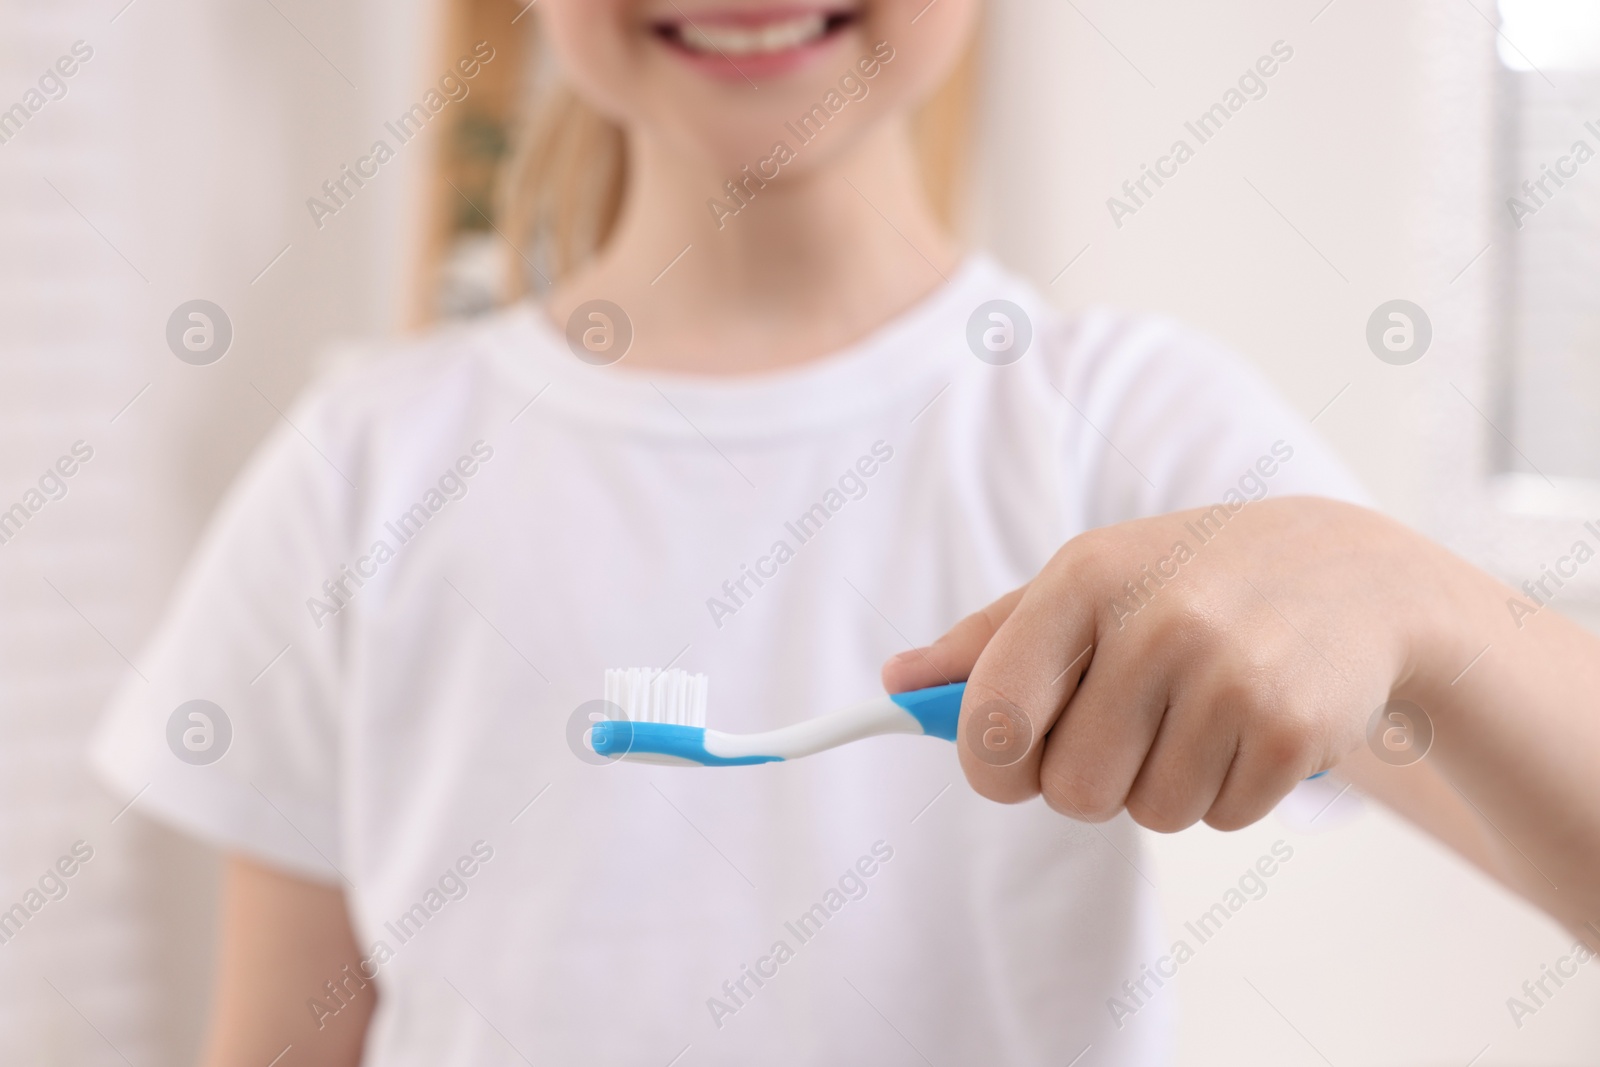 Photo of Little girl holding plastic toothbrush, closeup view